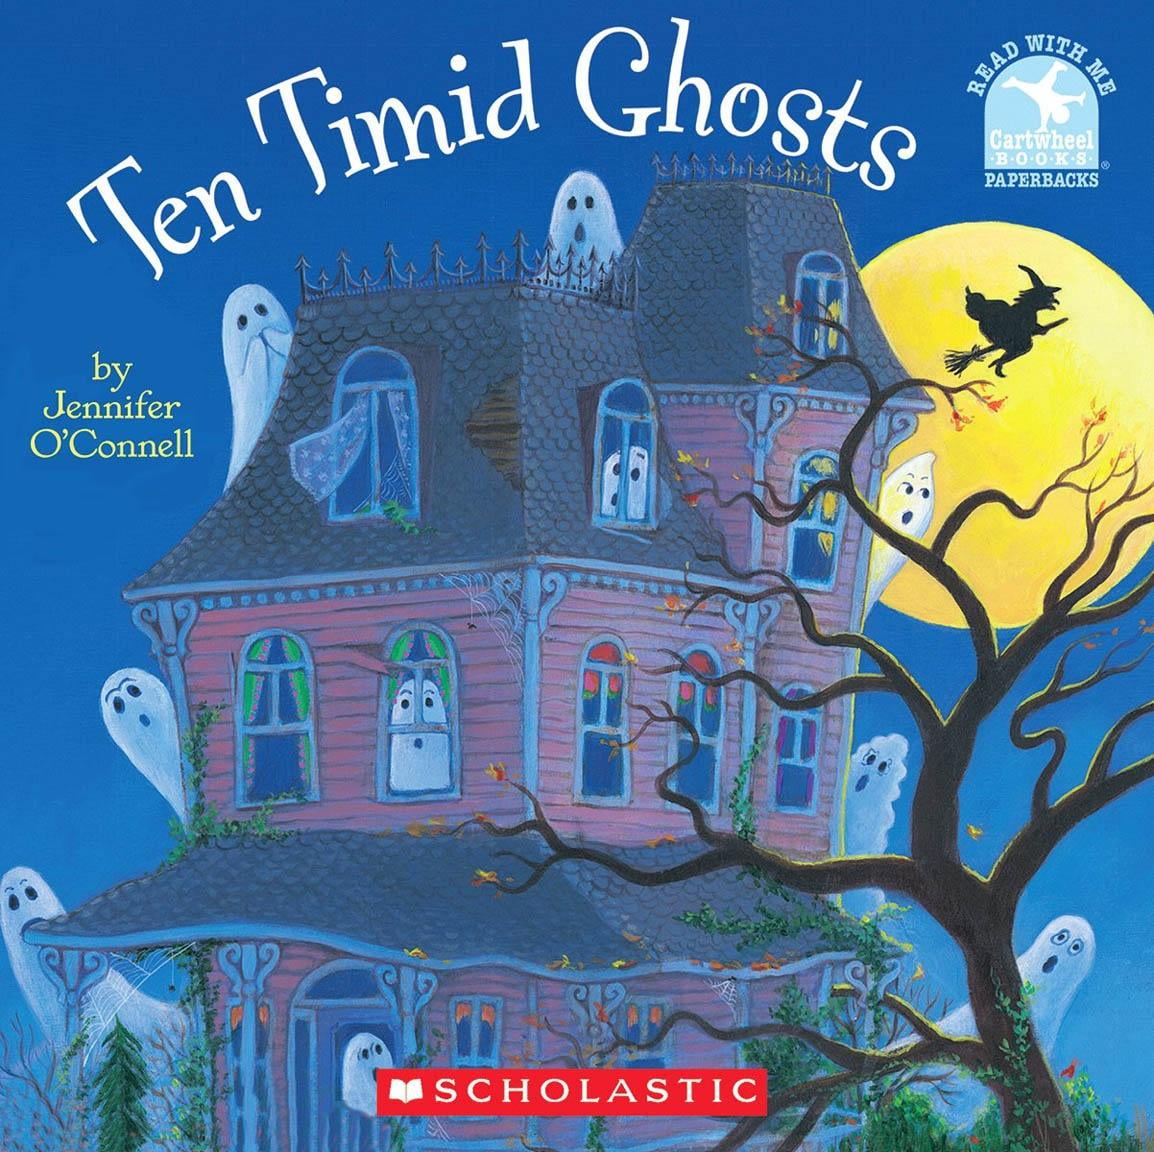 ten timid ghosts story